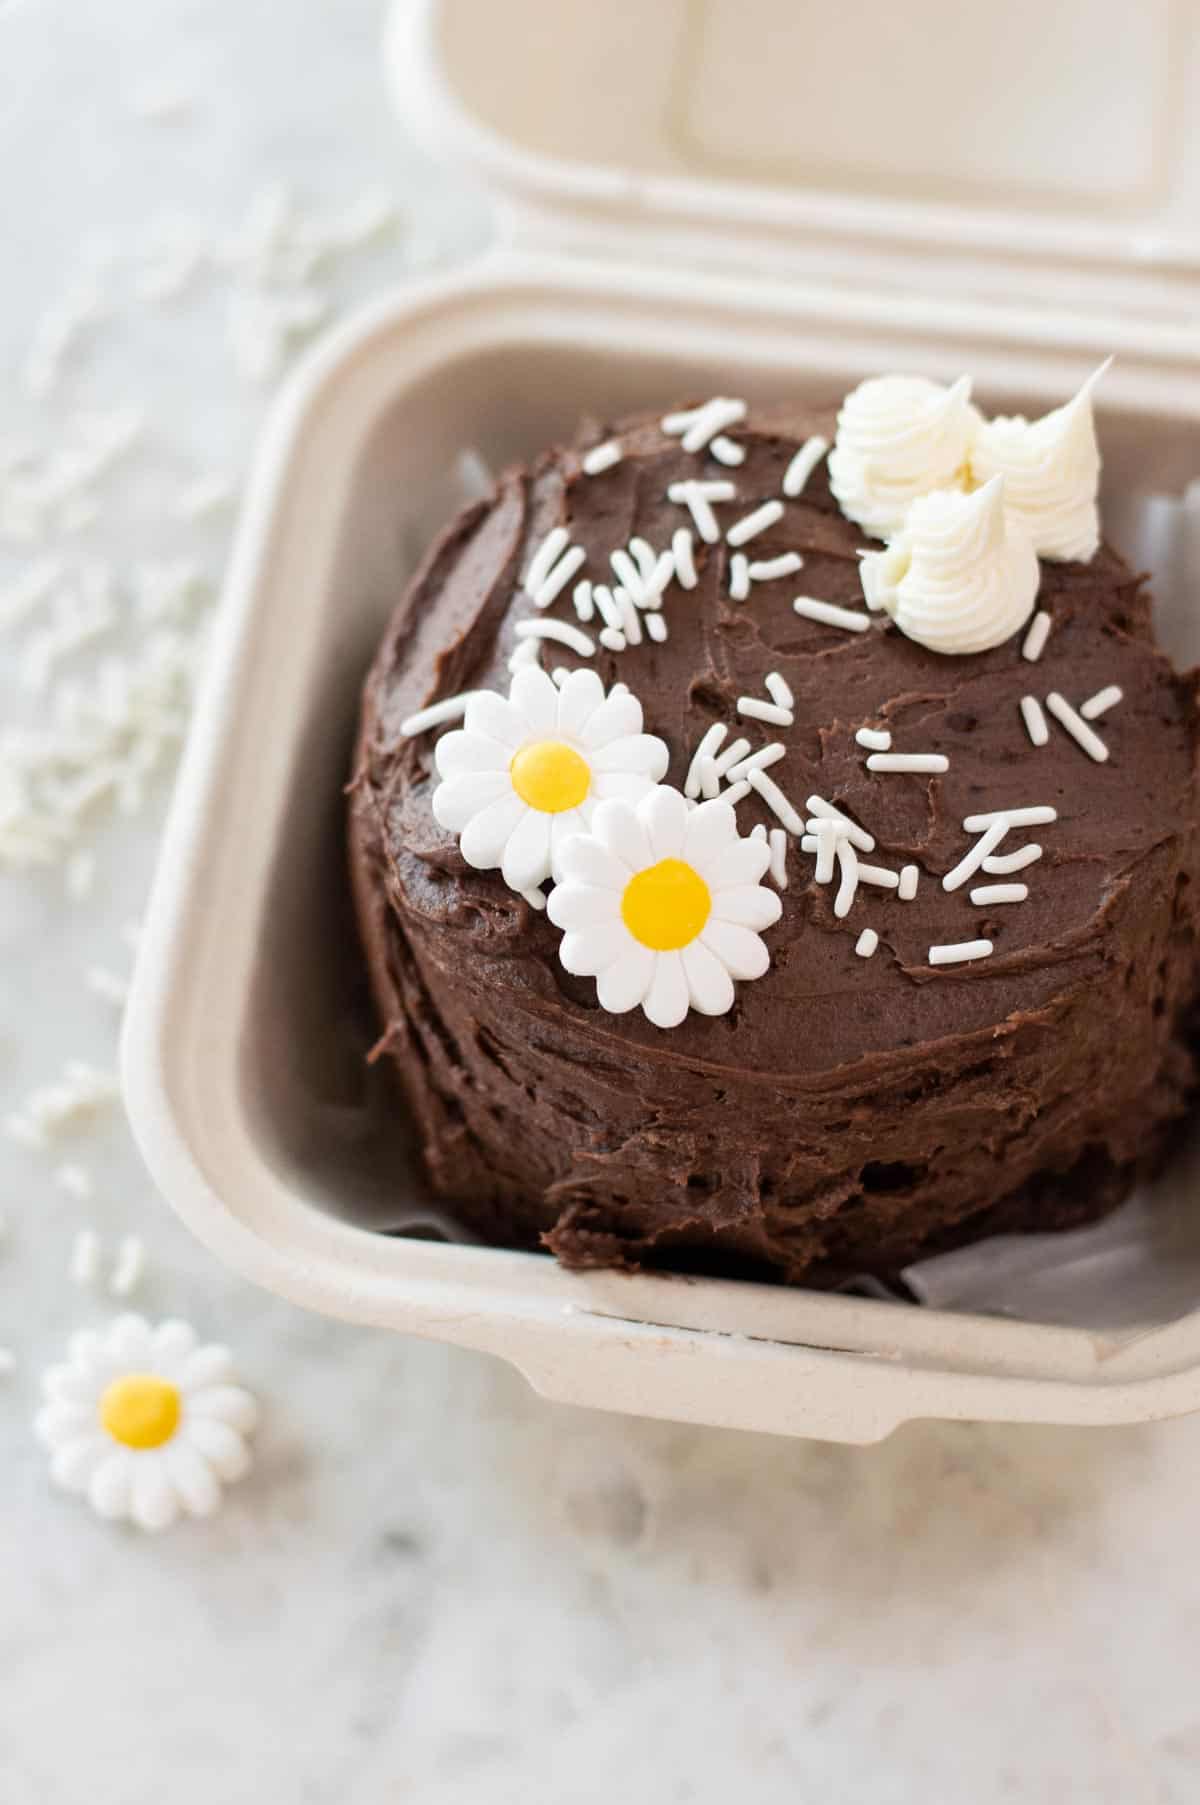 Bento Cake with chocolate frosting in a takeout box